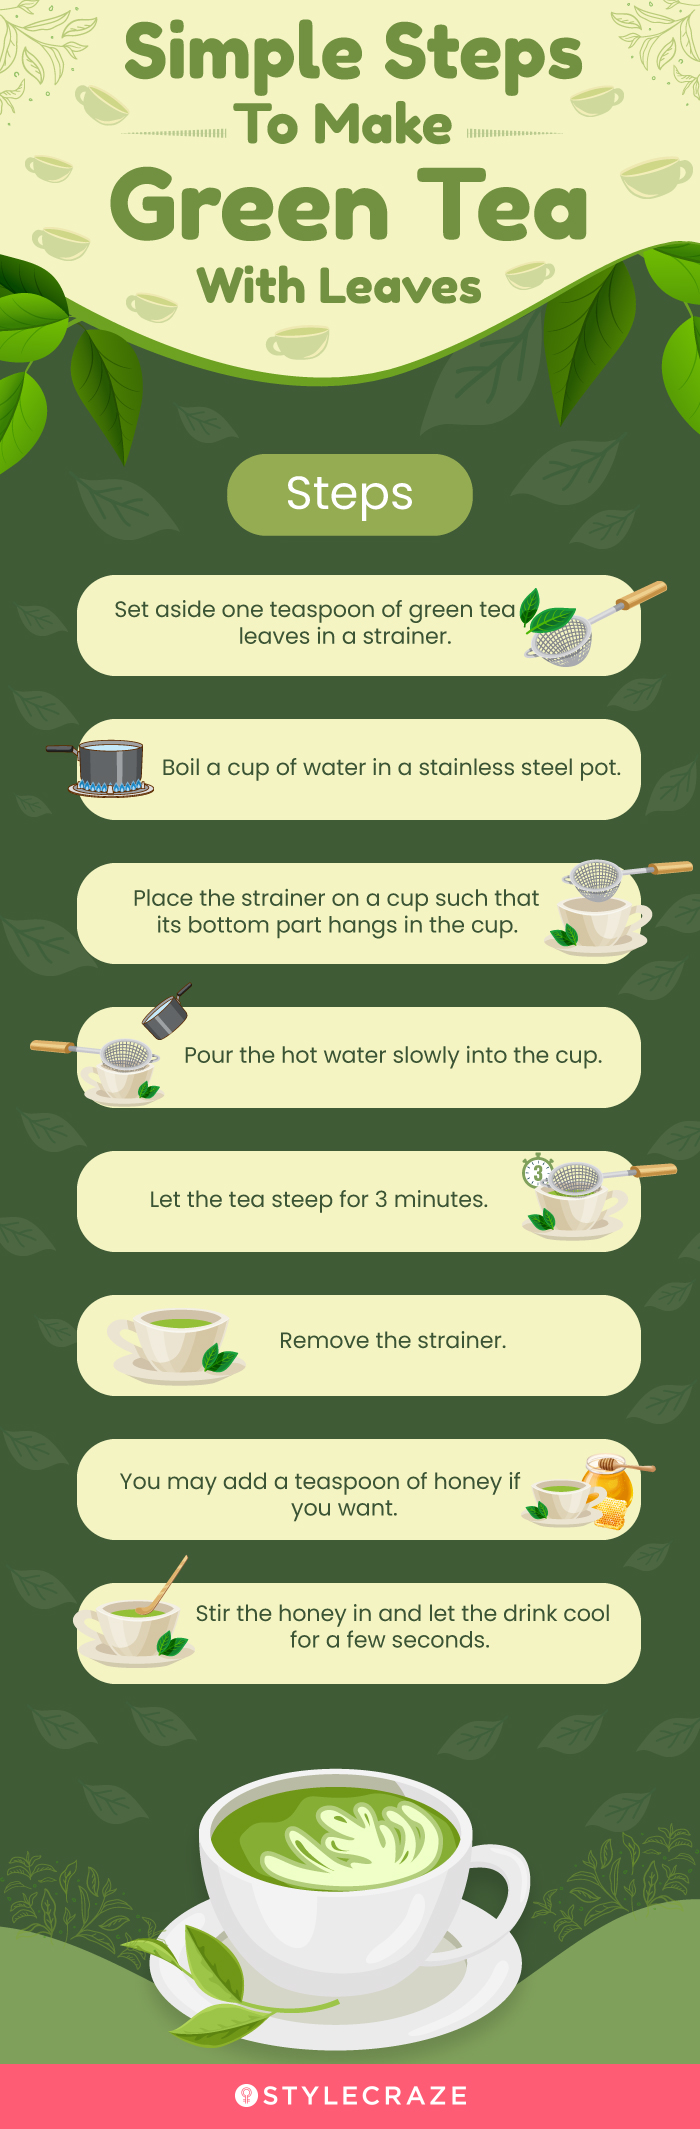 simple steps to make green tea with leaves (infographic)